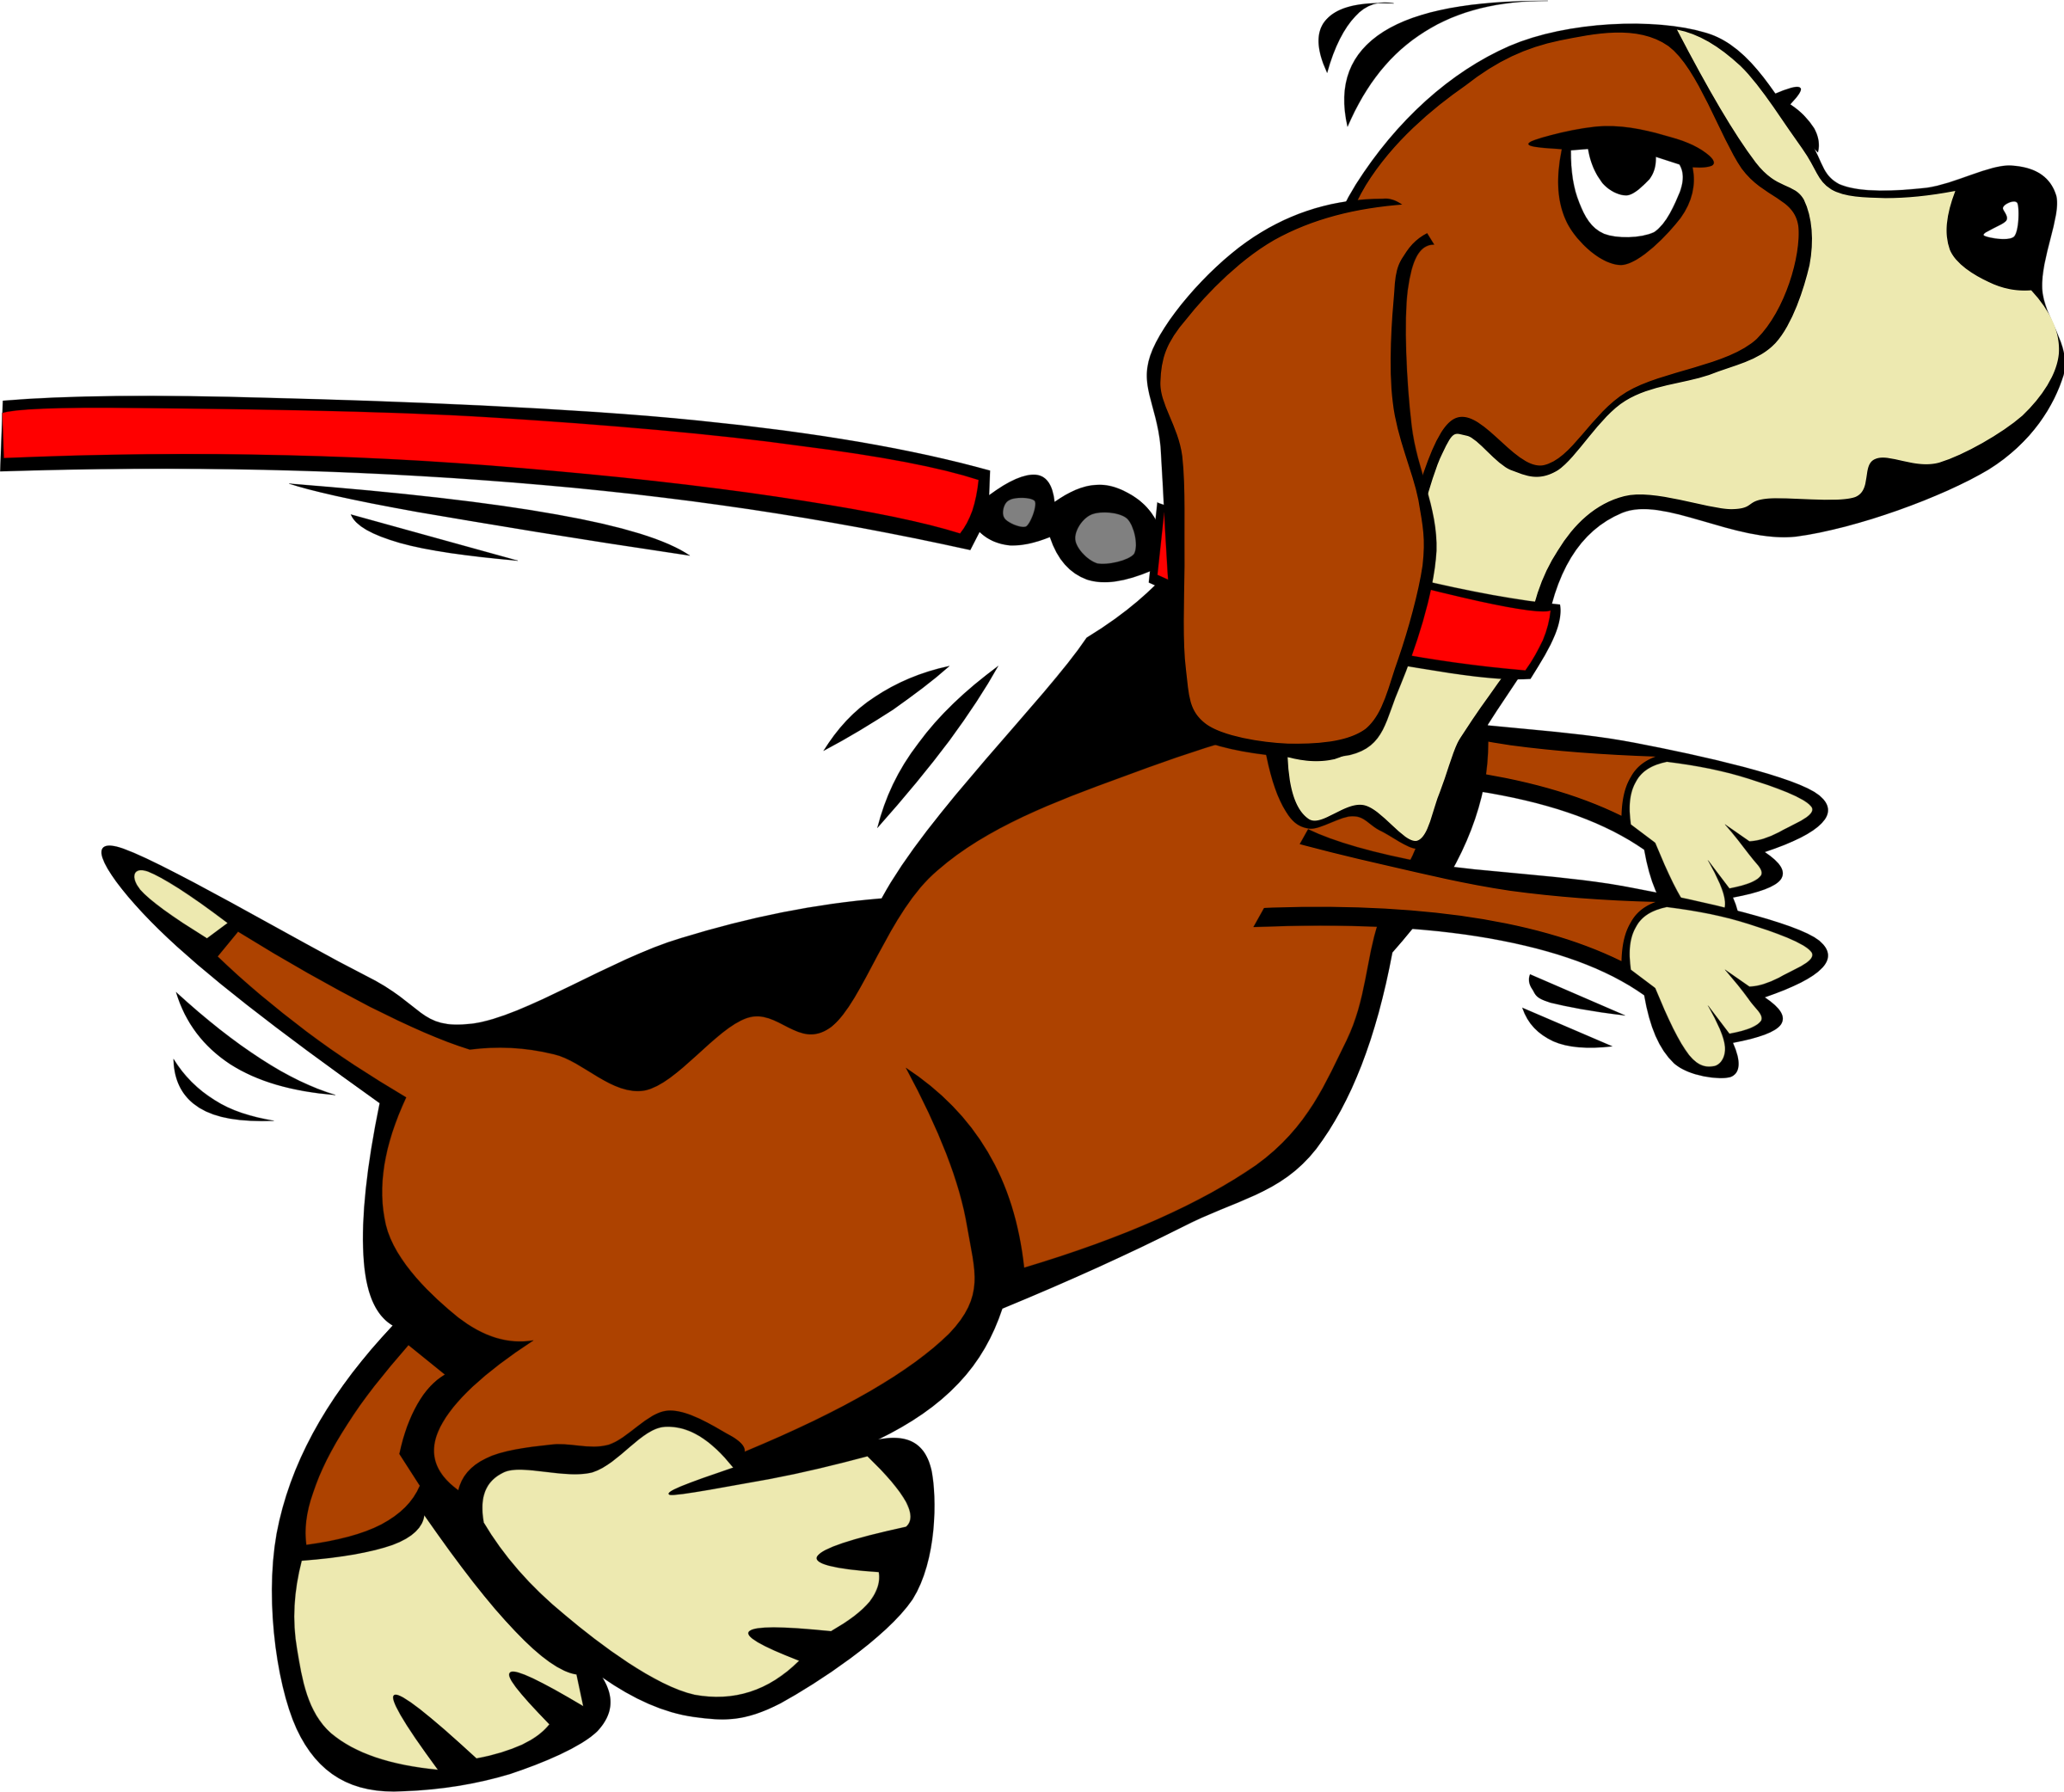 Big Image (Png) - Animated Dog, Transparent background PNG HD thumbnail